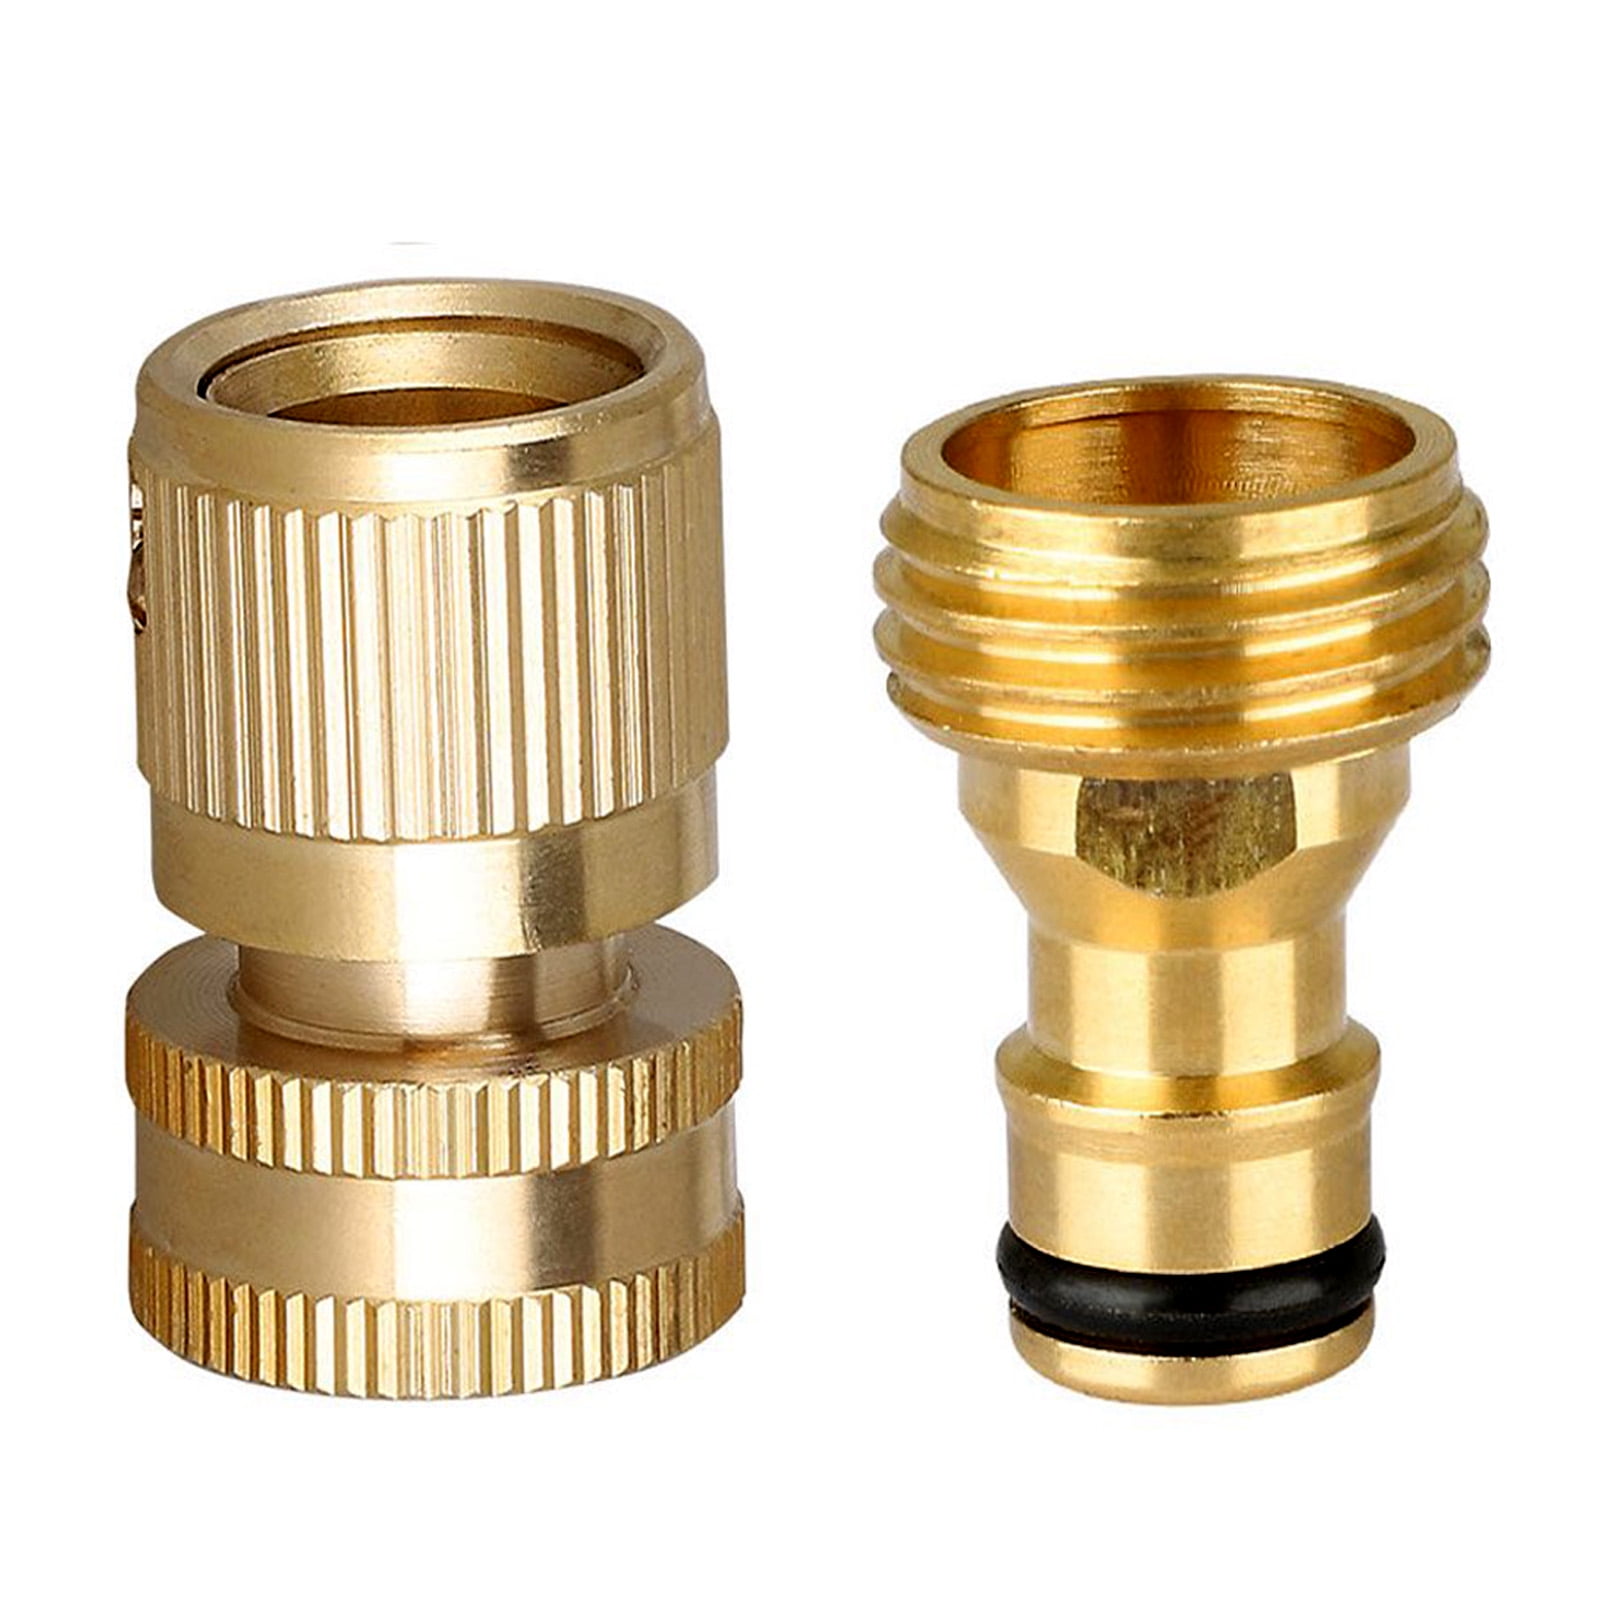 1 Set Garden Hose Quick Connector 3/4" GHT Brass Easy Connect Fitting Yard Tool 